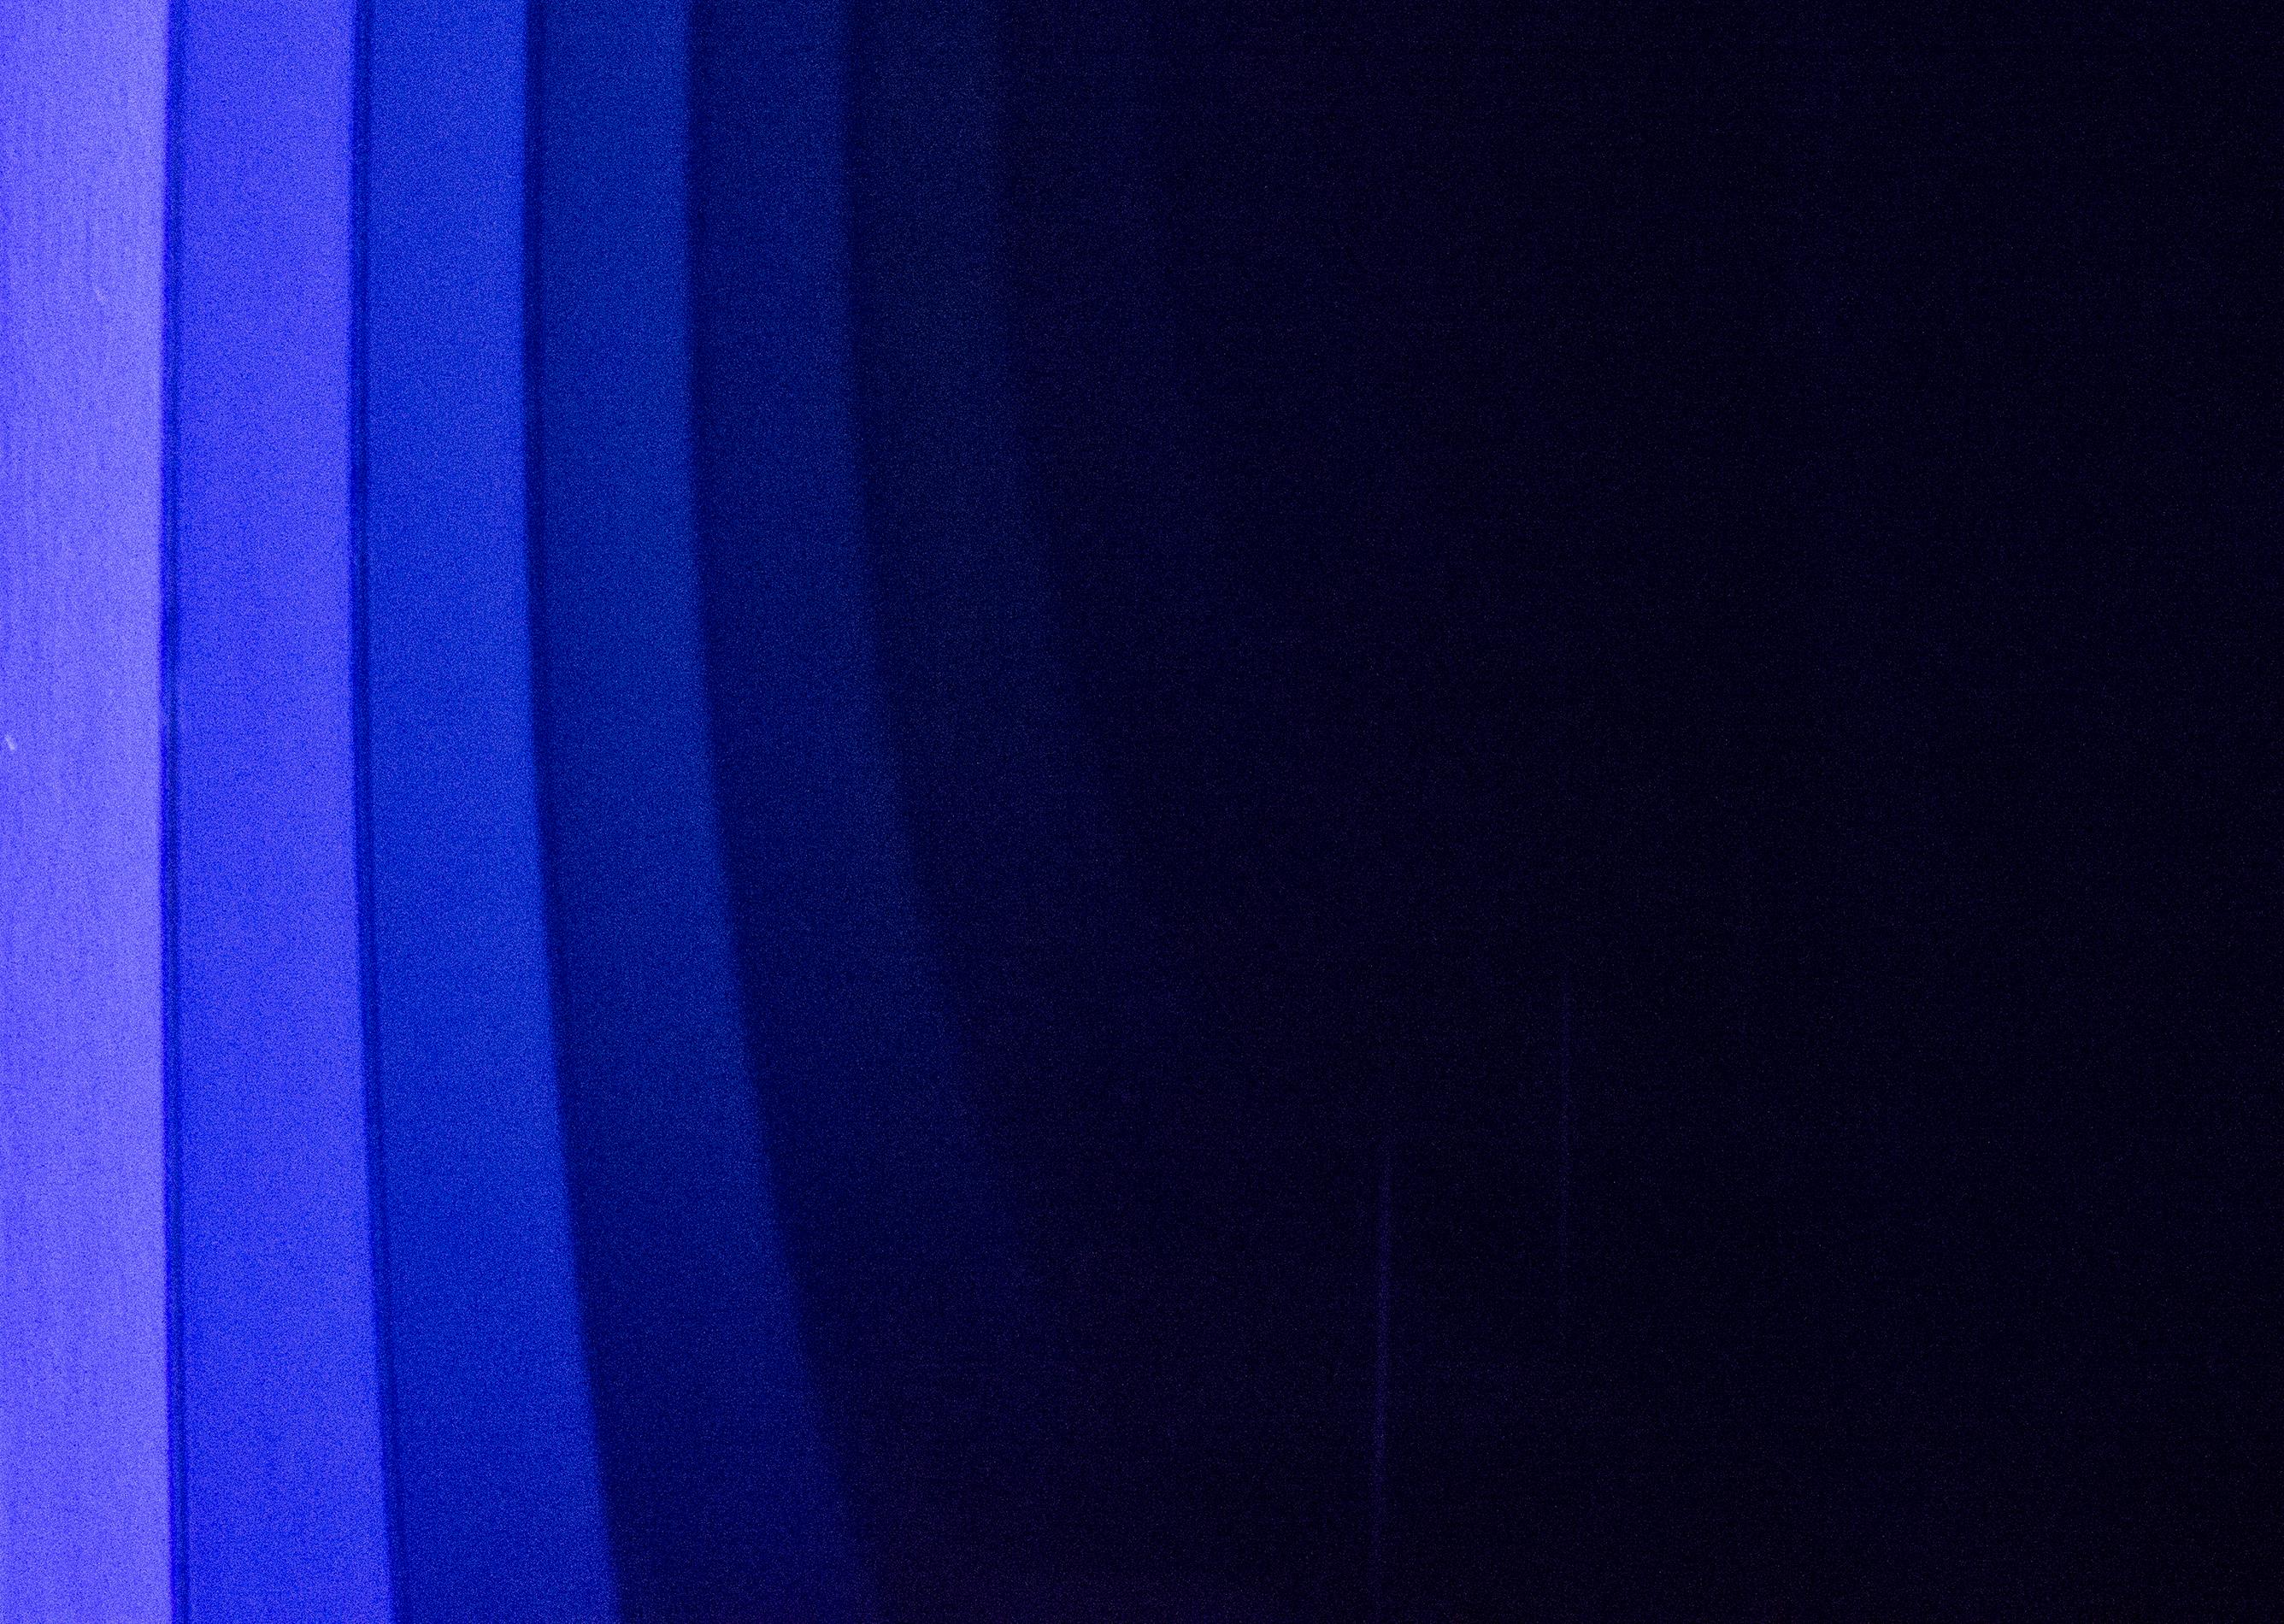 Bent Blue - glowing, illuminated, symmetrical, geometric forms in electric blue 2